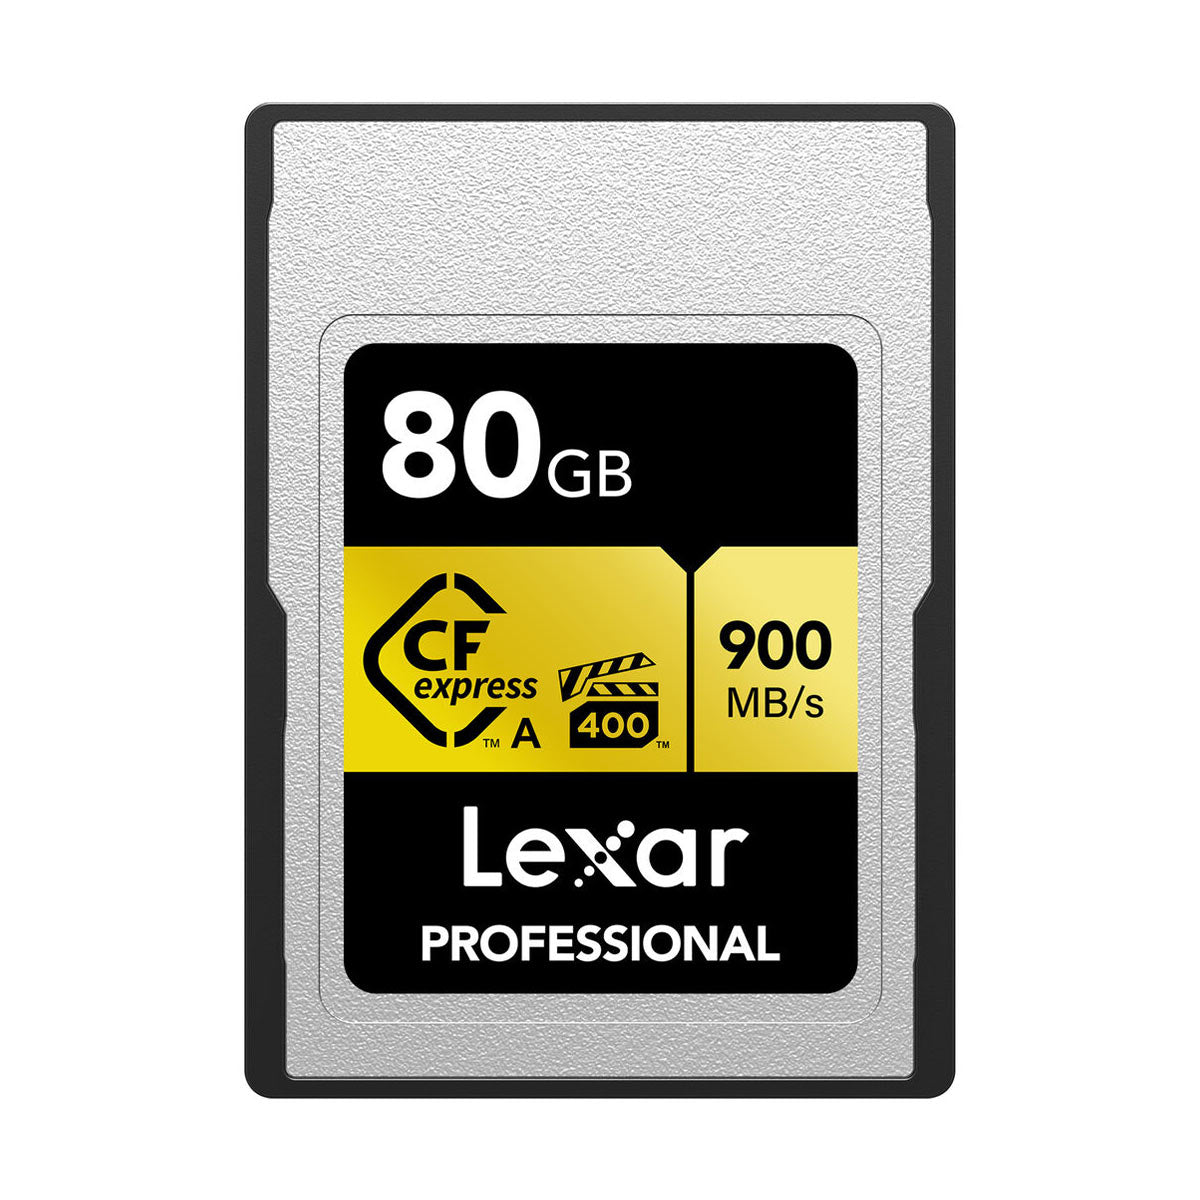 Lexar 80GB Professional CFexpress Type A Memory Card (Gold Series) (VPG 400)